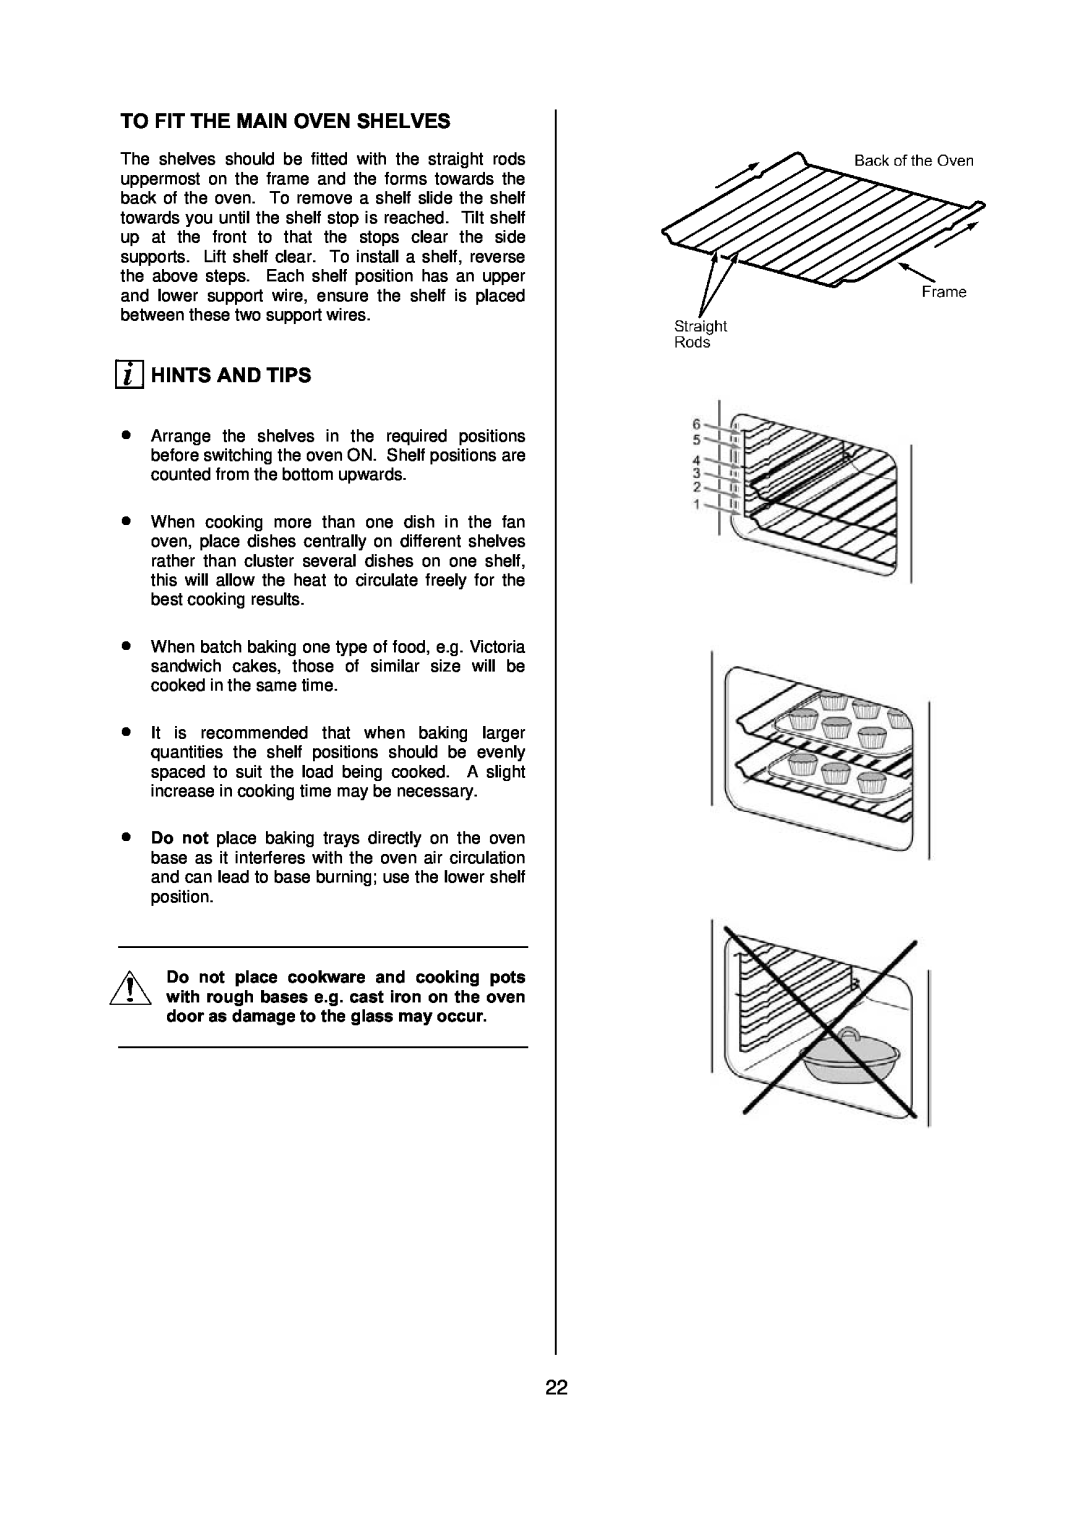 Electrolux D77000 user manual To Fit The Main Oven Shelves, Hints And Tips 